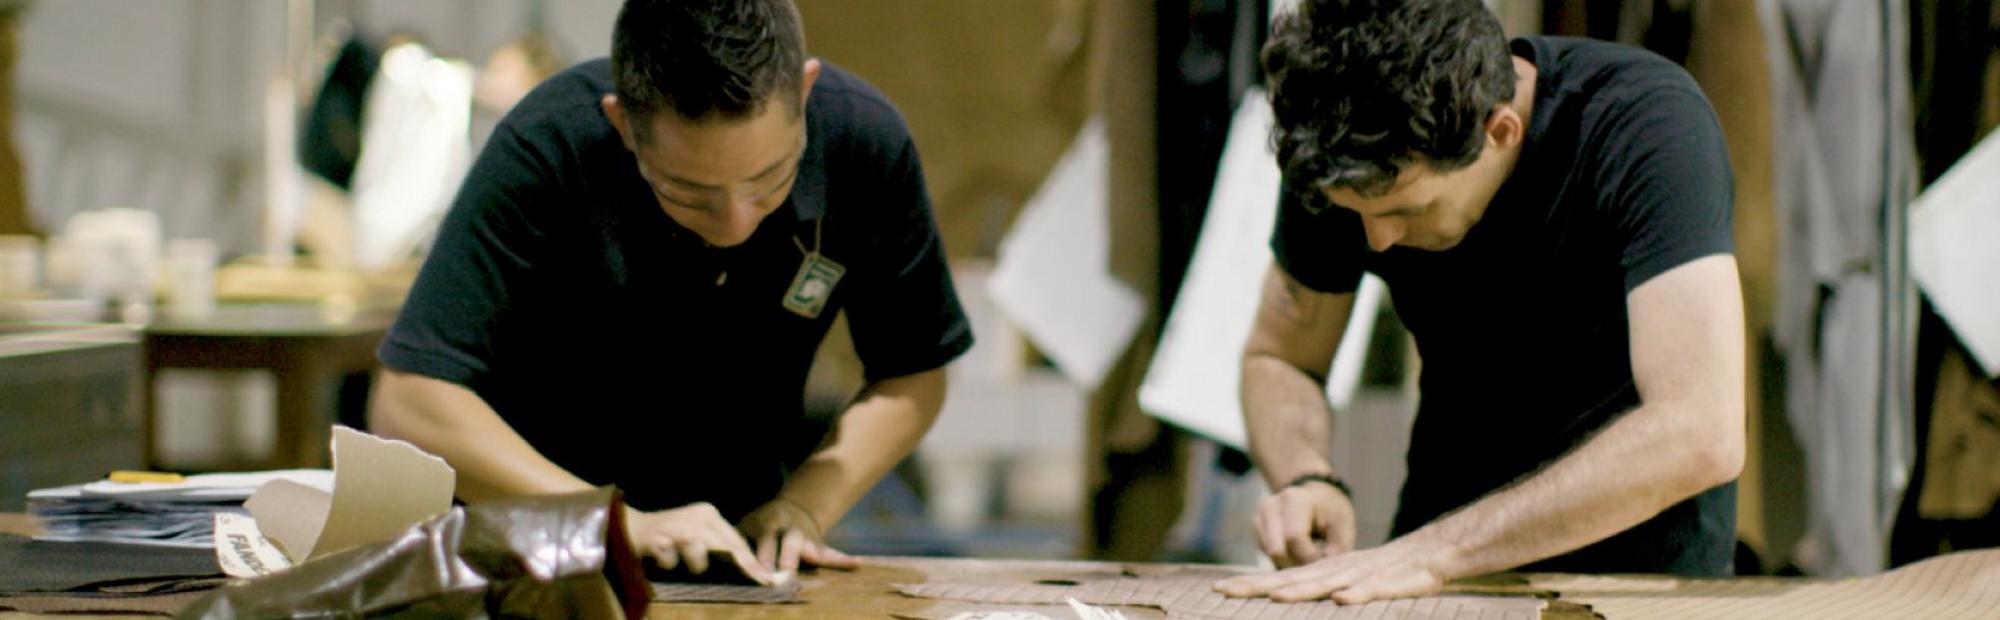 two men cutting leather